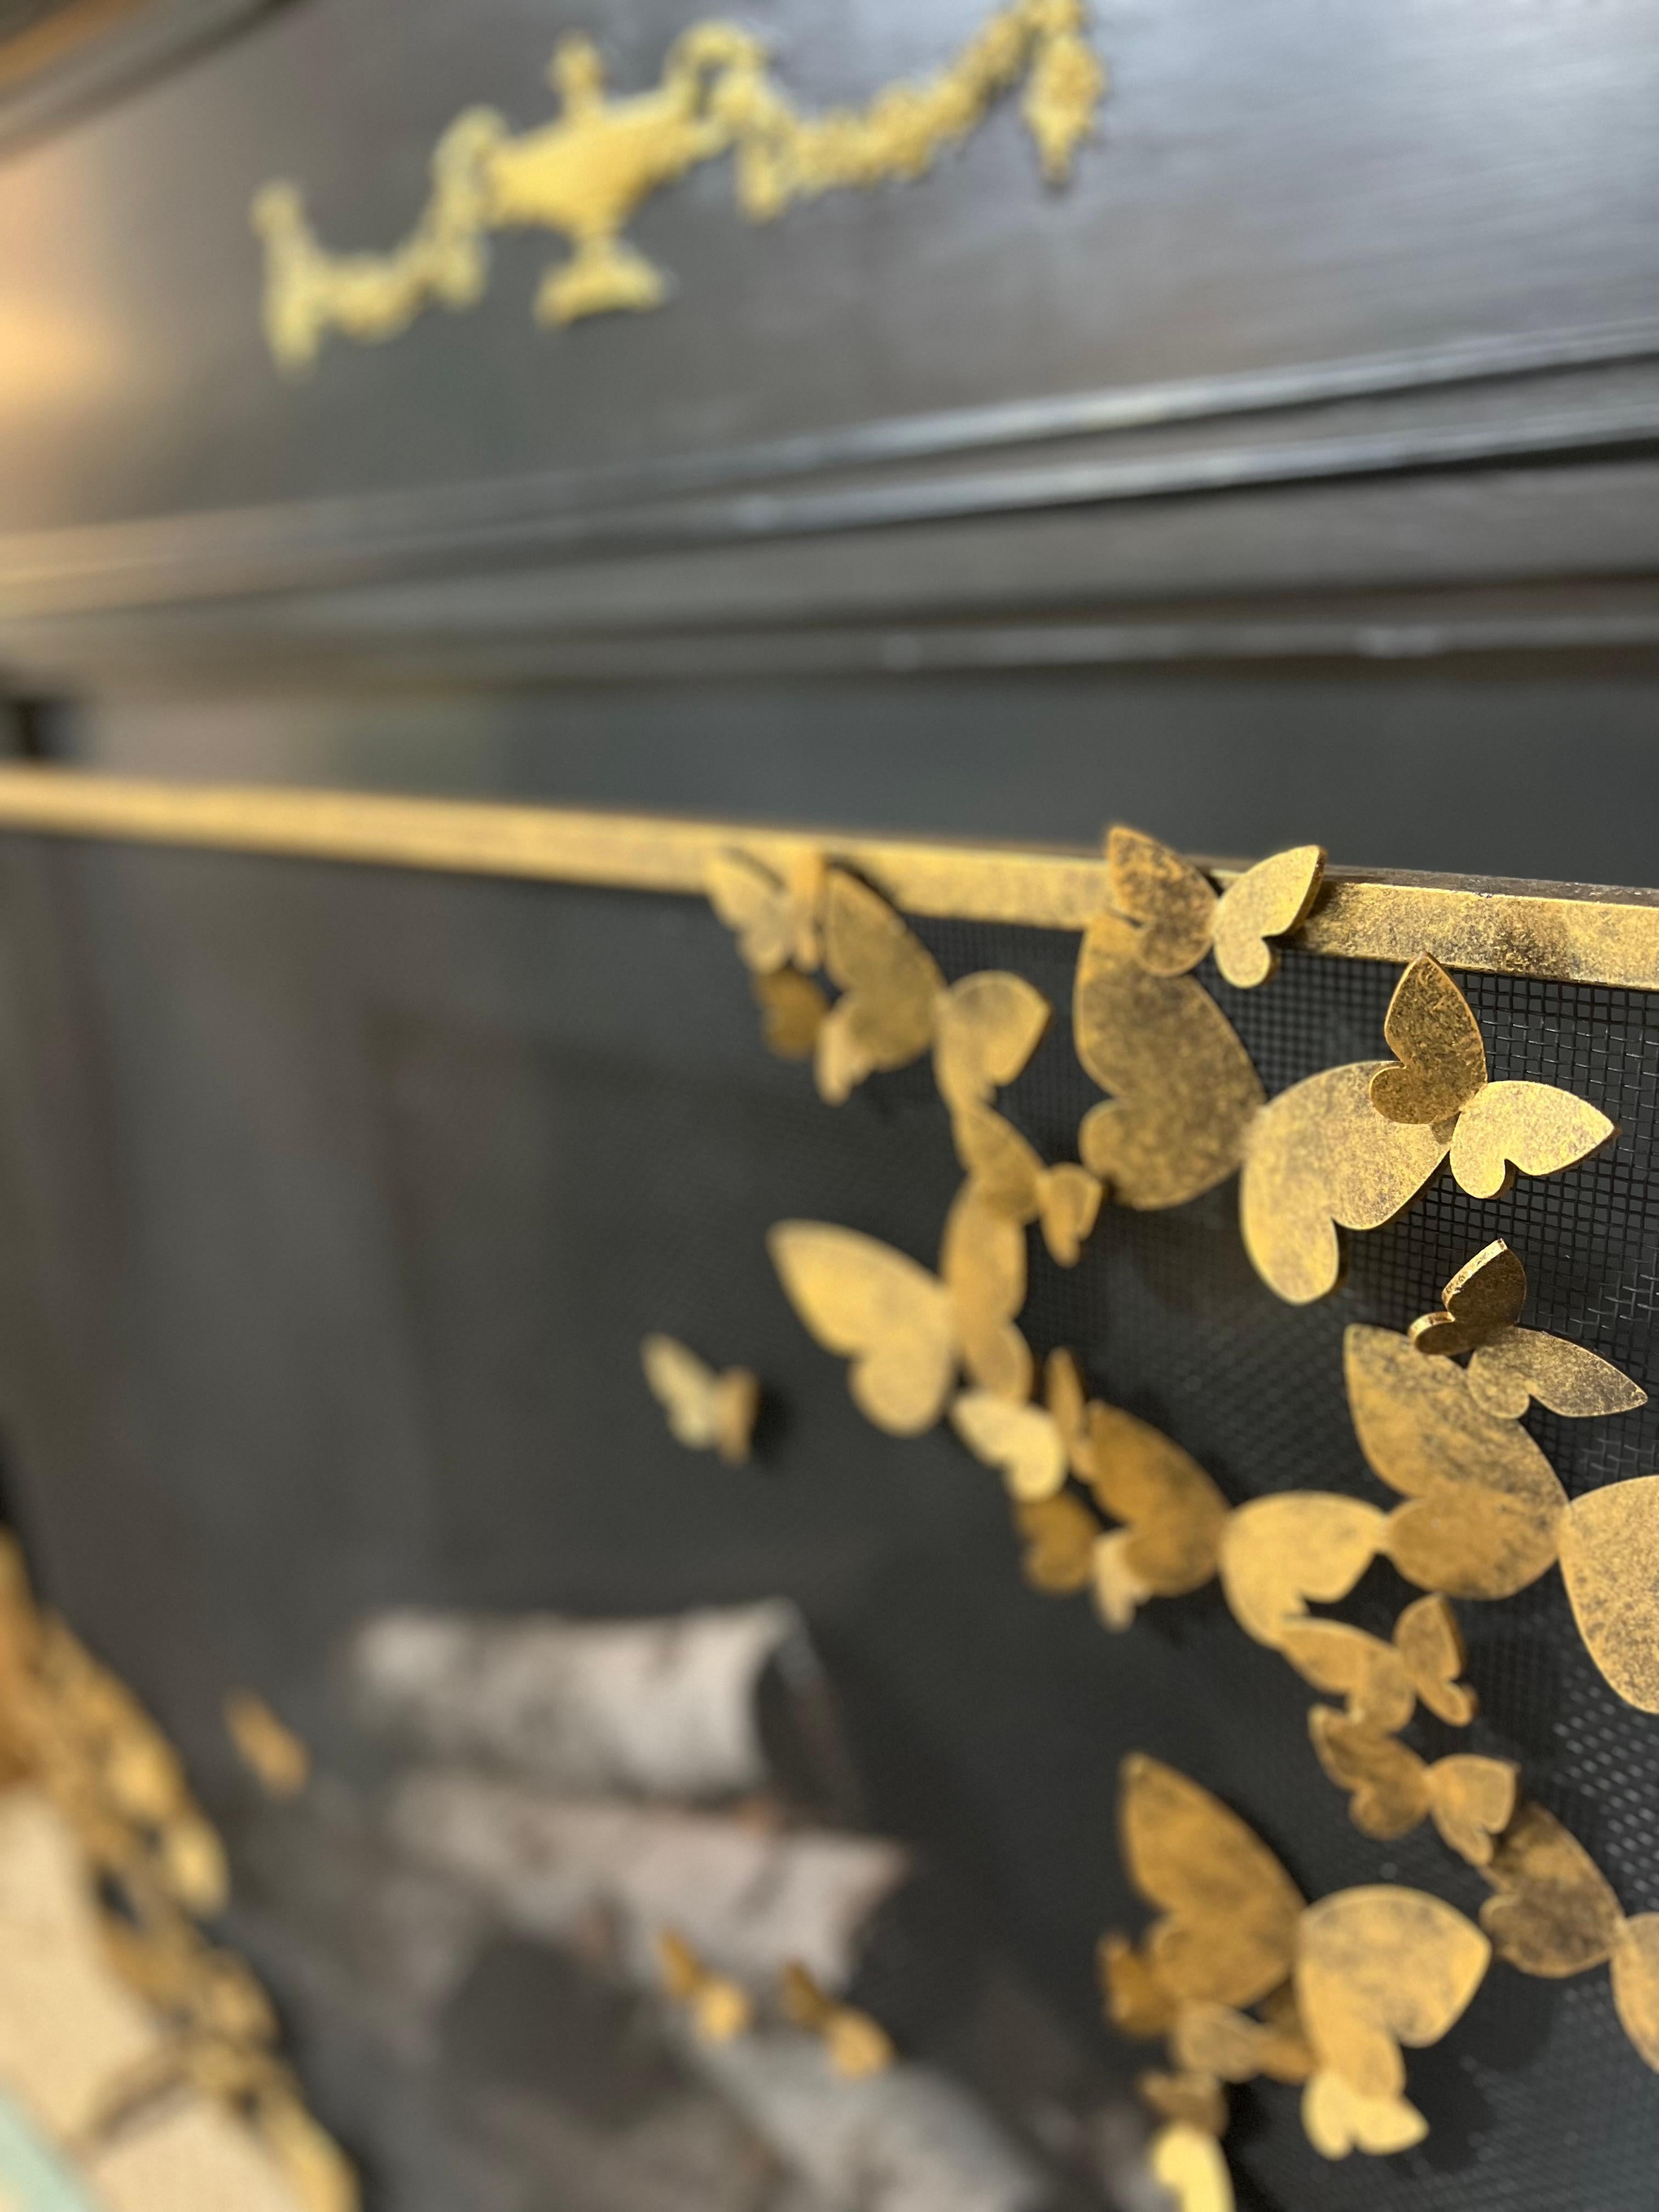 Introducing the Butterfly Fire Screen, Lighter Version - a stunning and enchanting piece that transforms your fireplace into a welcoming and captivating focal point. This fire screen brings to life the ethereal beauty of fluttering butterfly wings